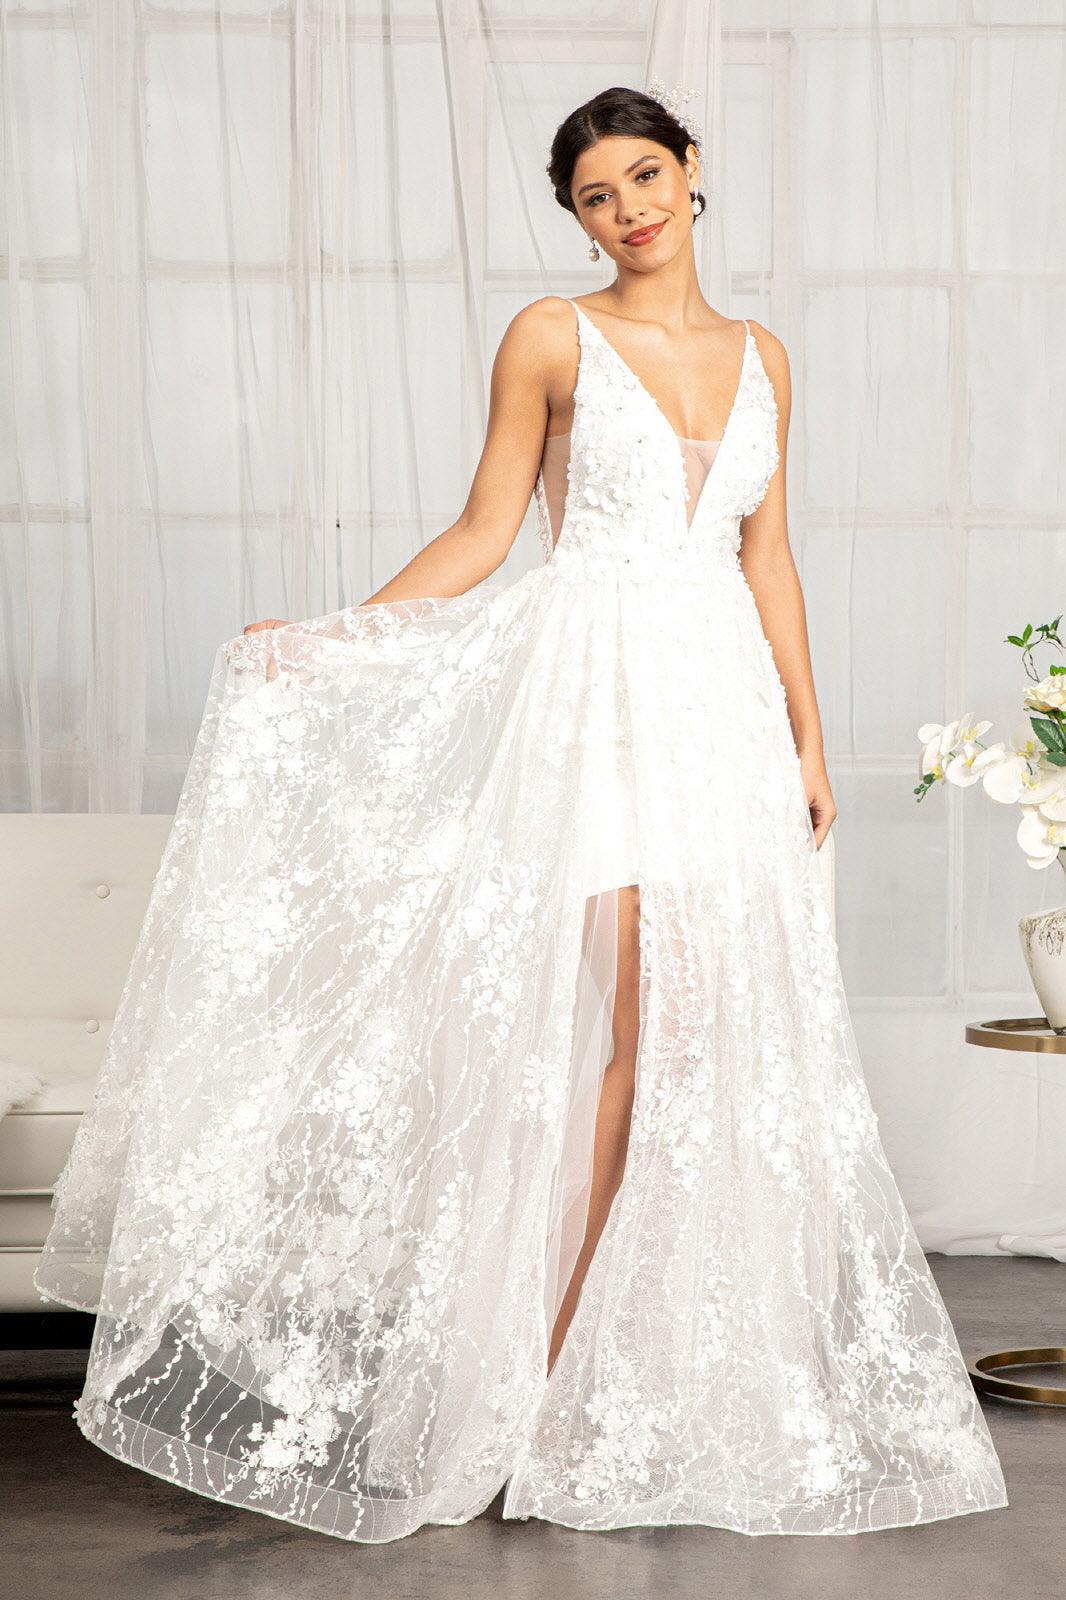 White Long Spaghetti Strap Floral Applique Wedding Dress for $566.99, – The  Dress Outlet